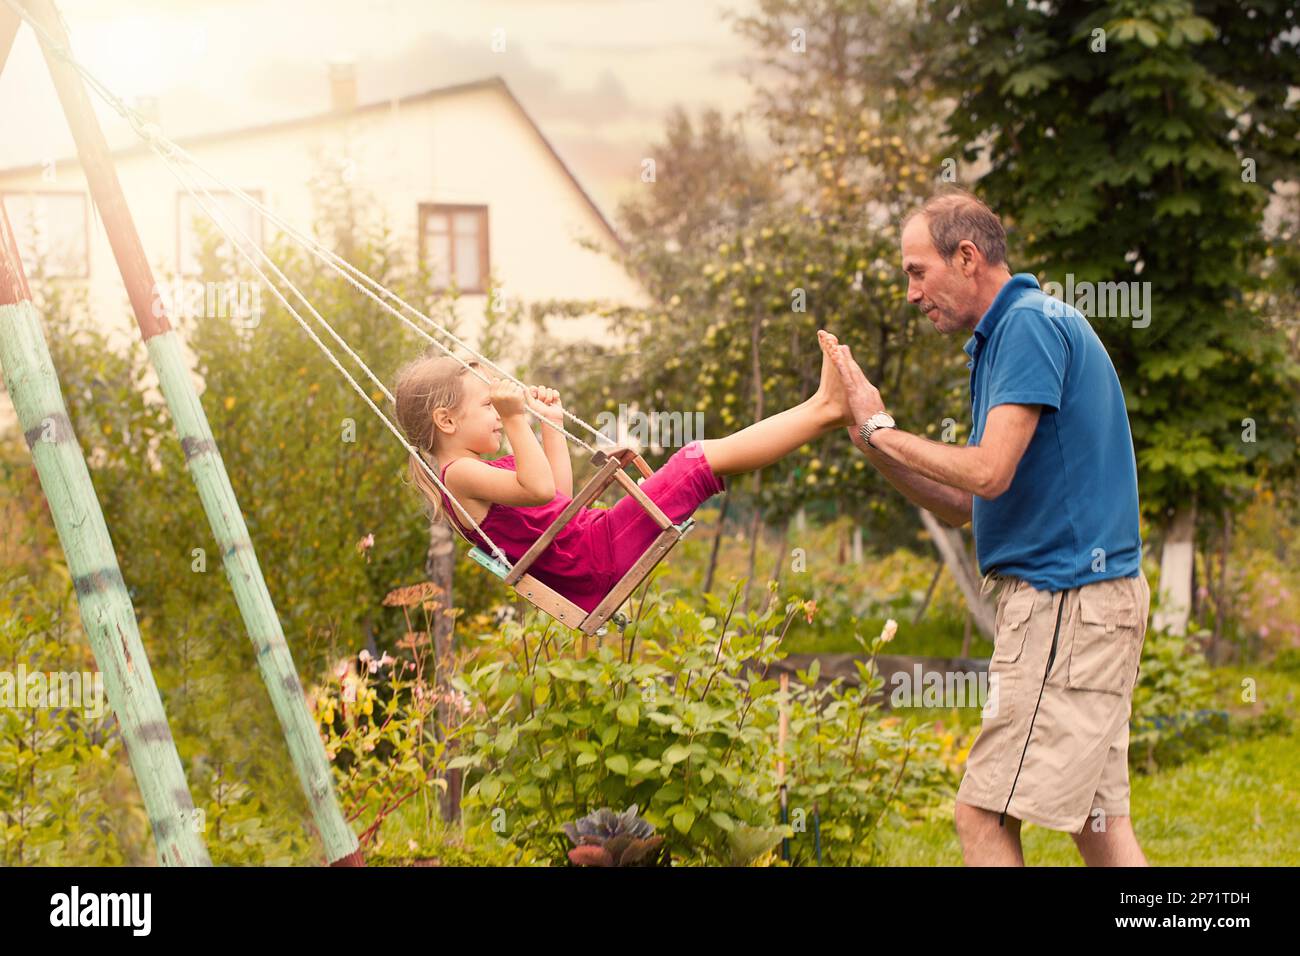 Cute little girl on a swing. Smiling child playing with Grandpa outdoors in summer Stock Photo